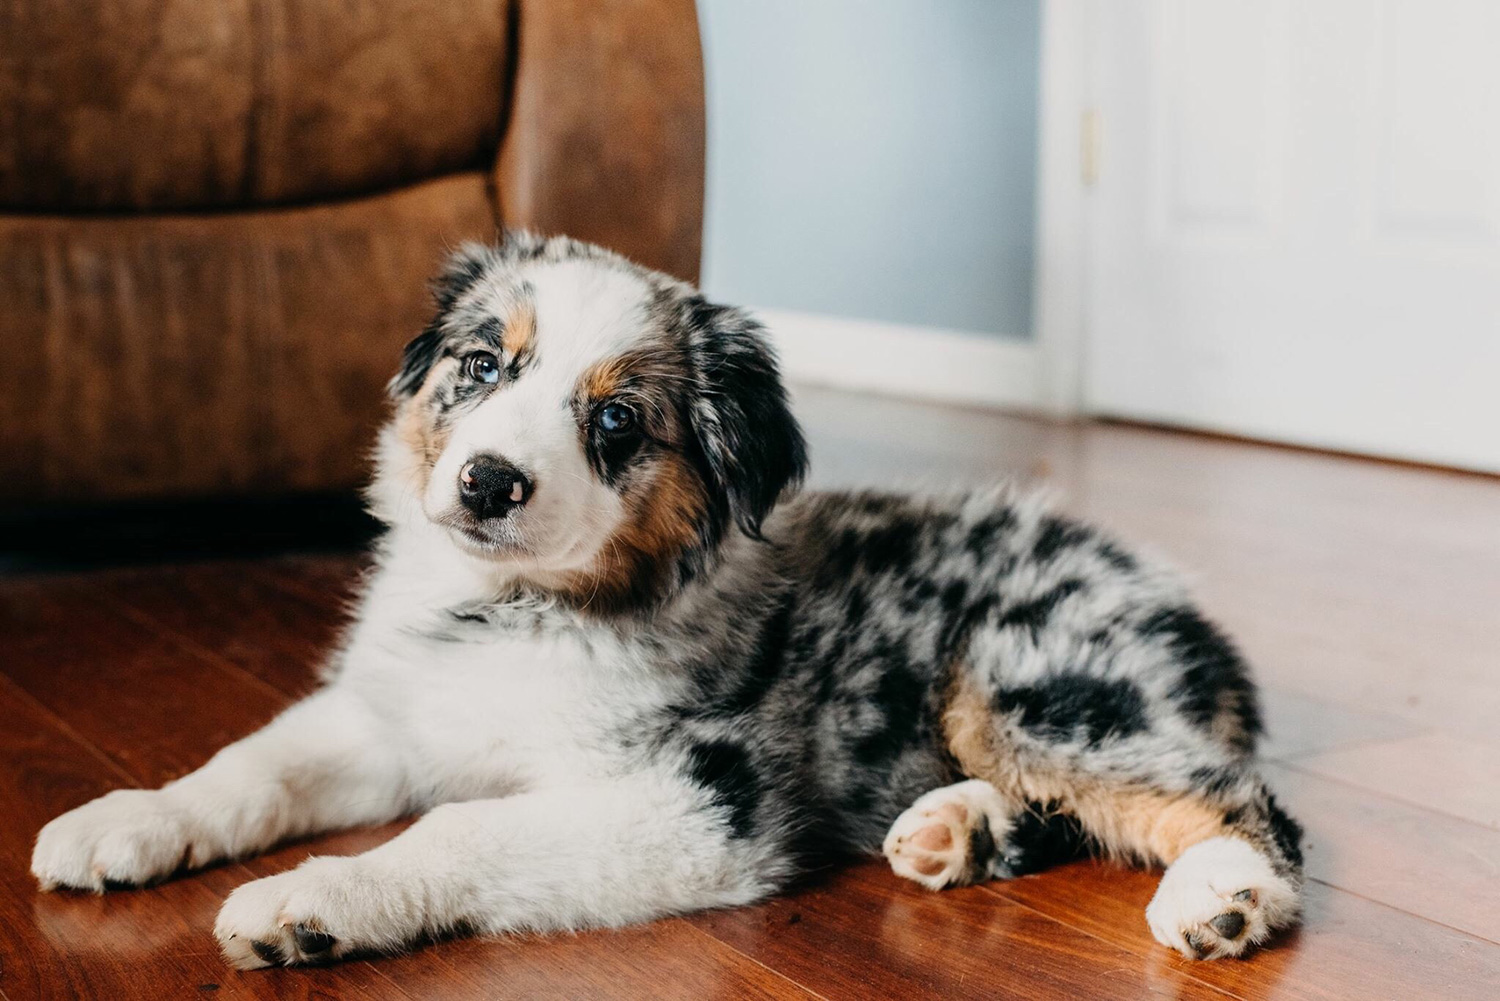 Australian Shepherd Puppies: The Ultimate Guide for New Dog Owners